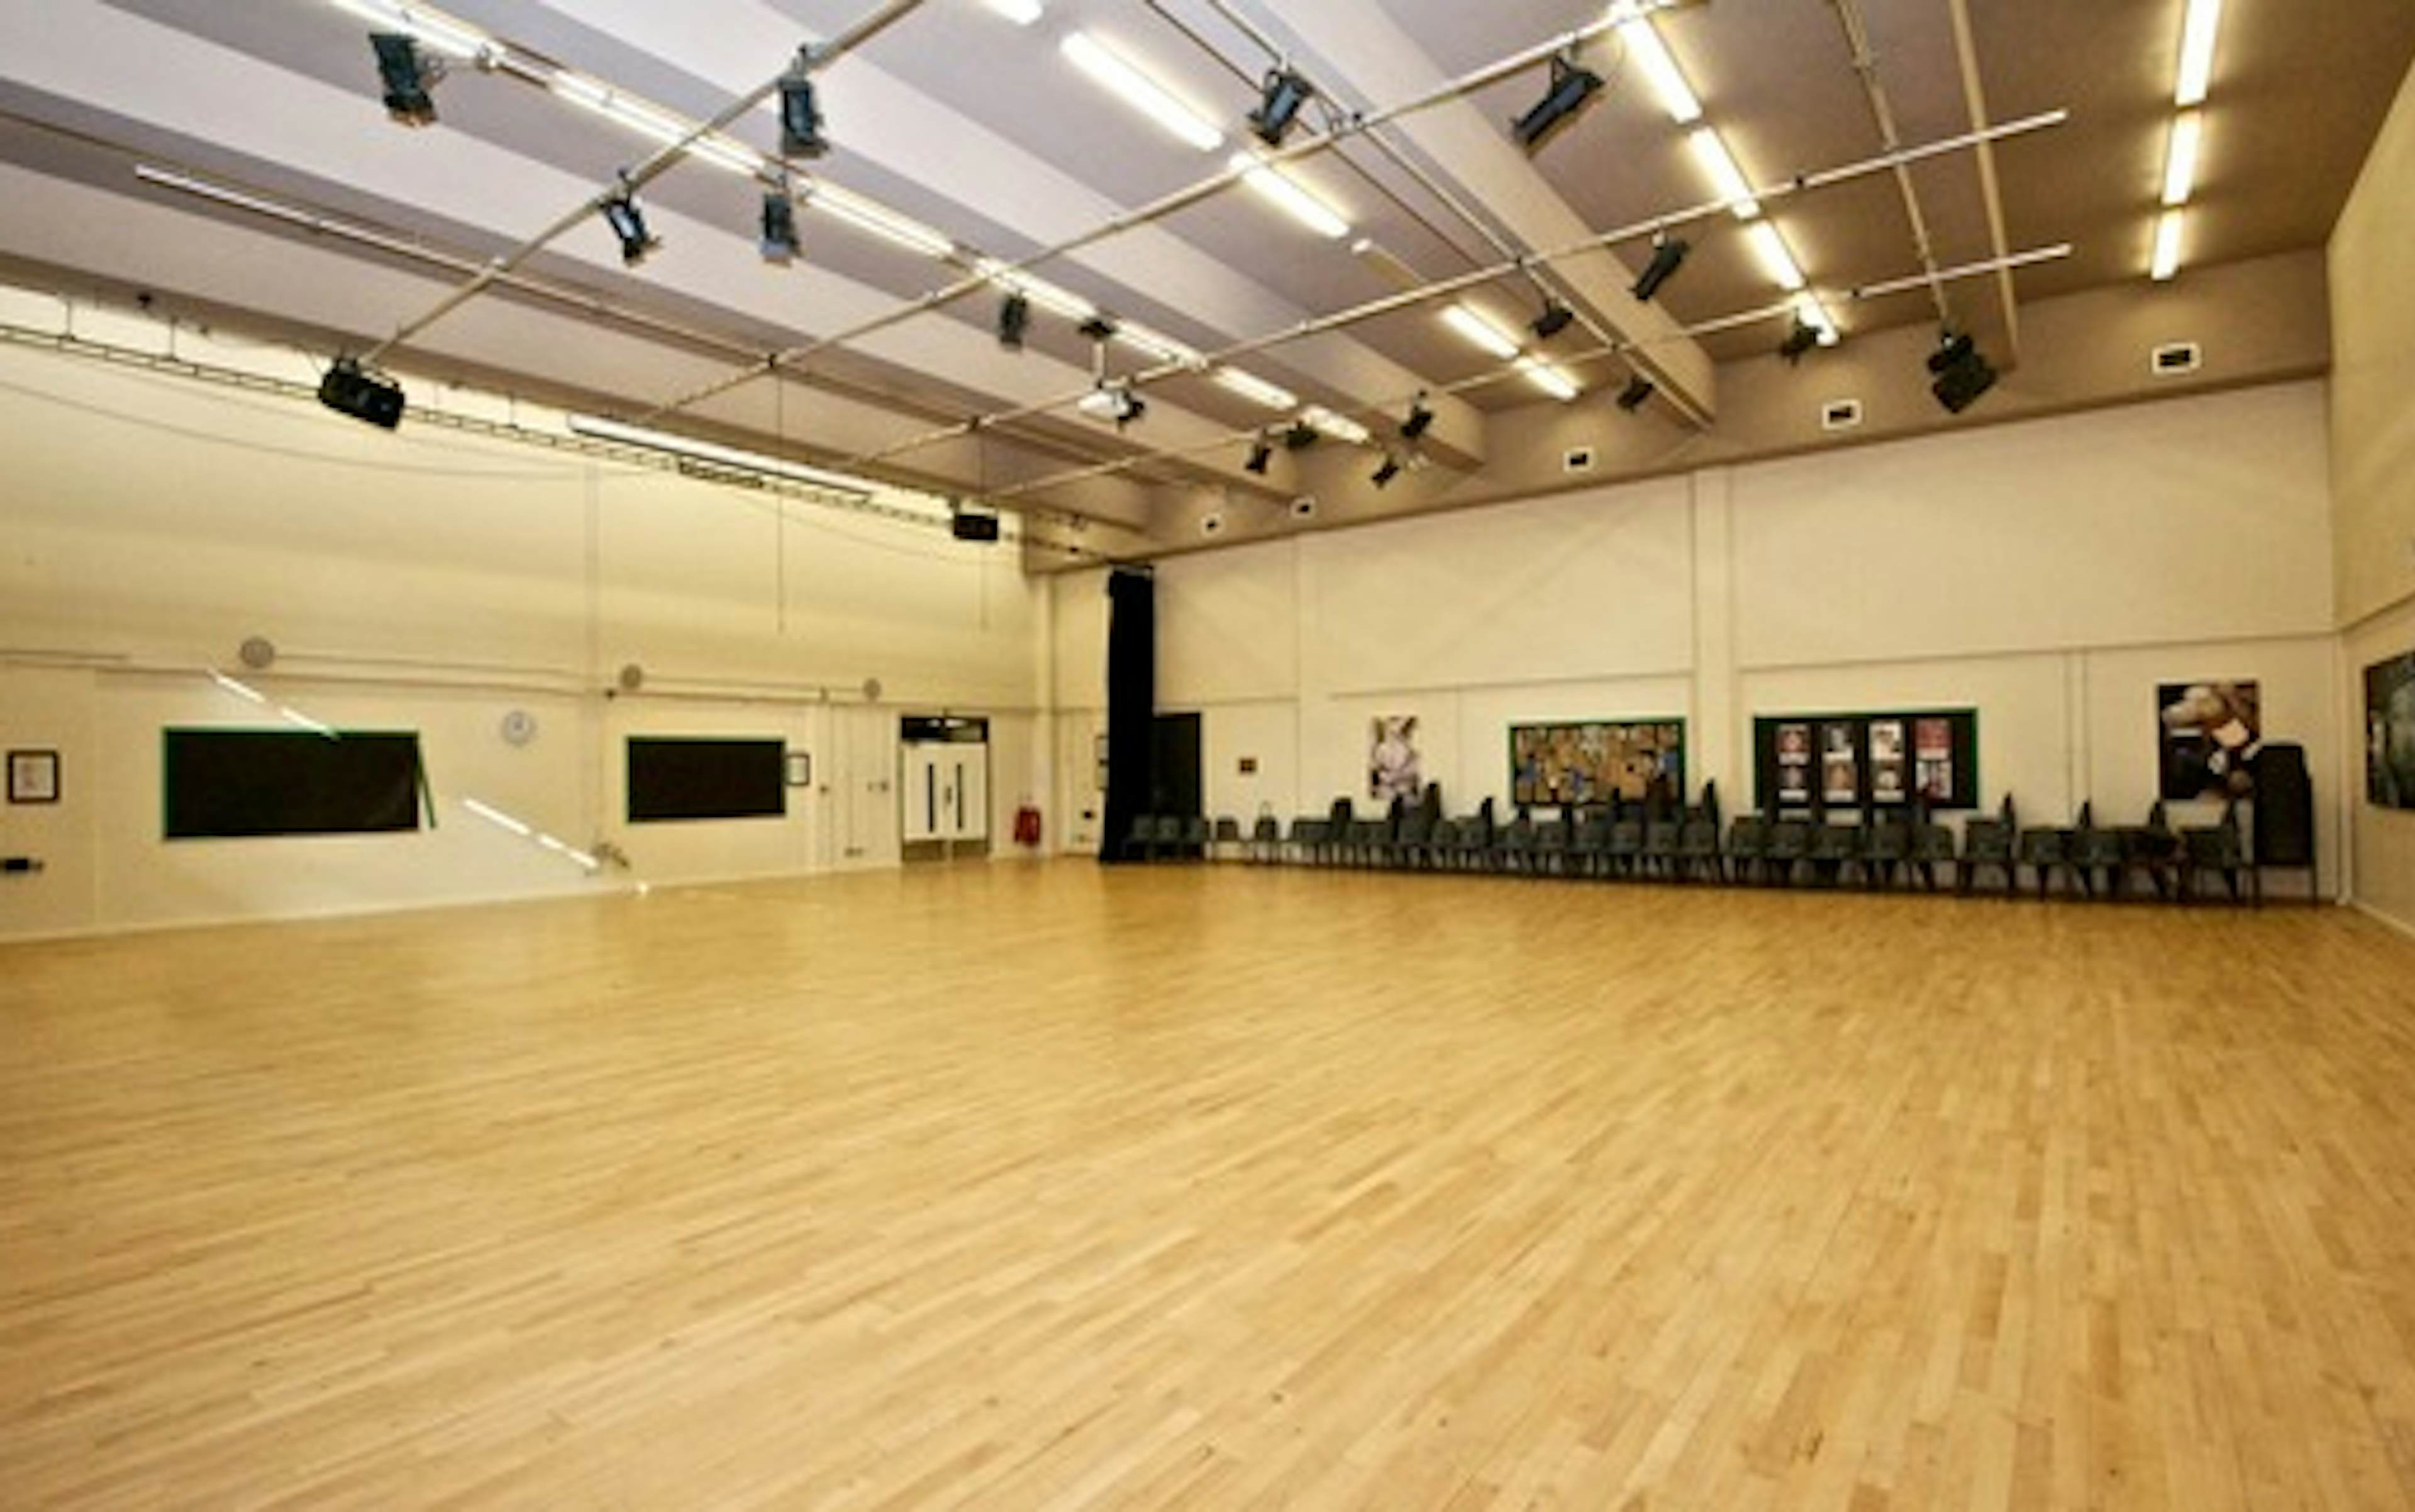 Brentside High School - Assembly Hall image 1